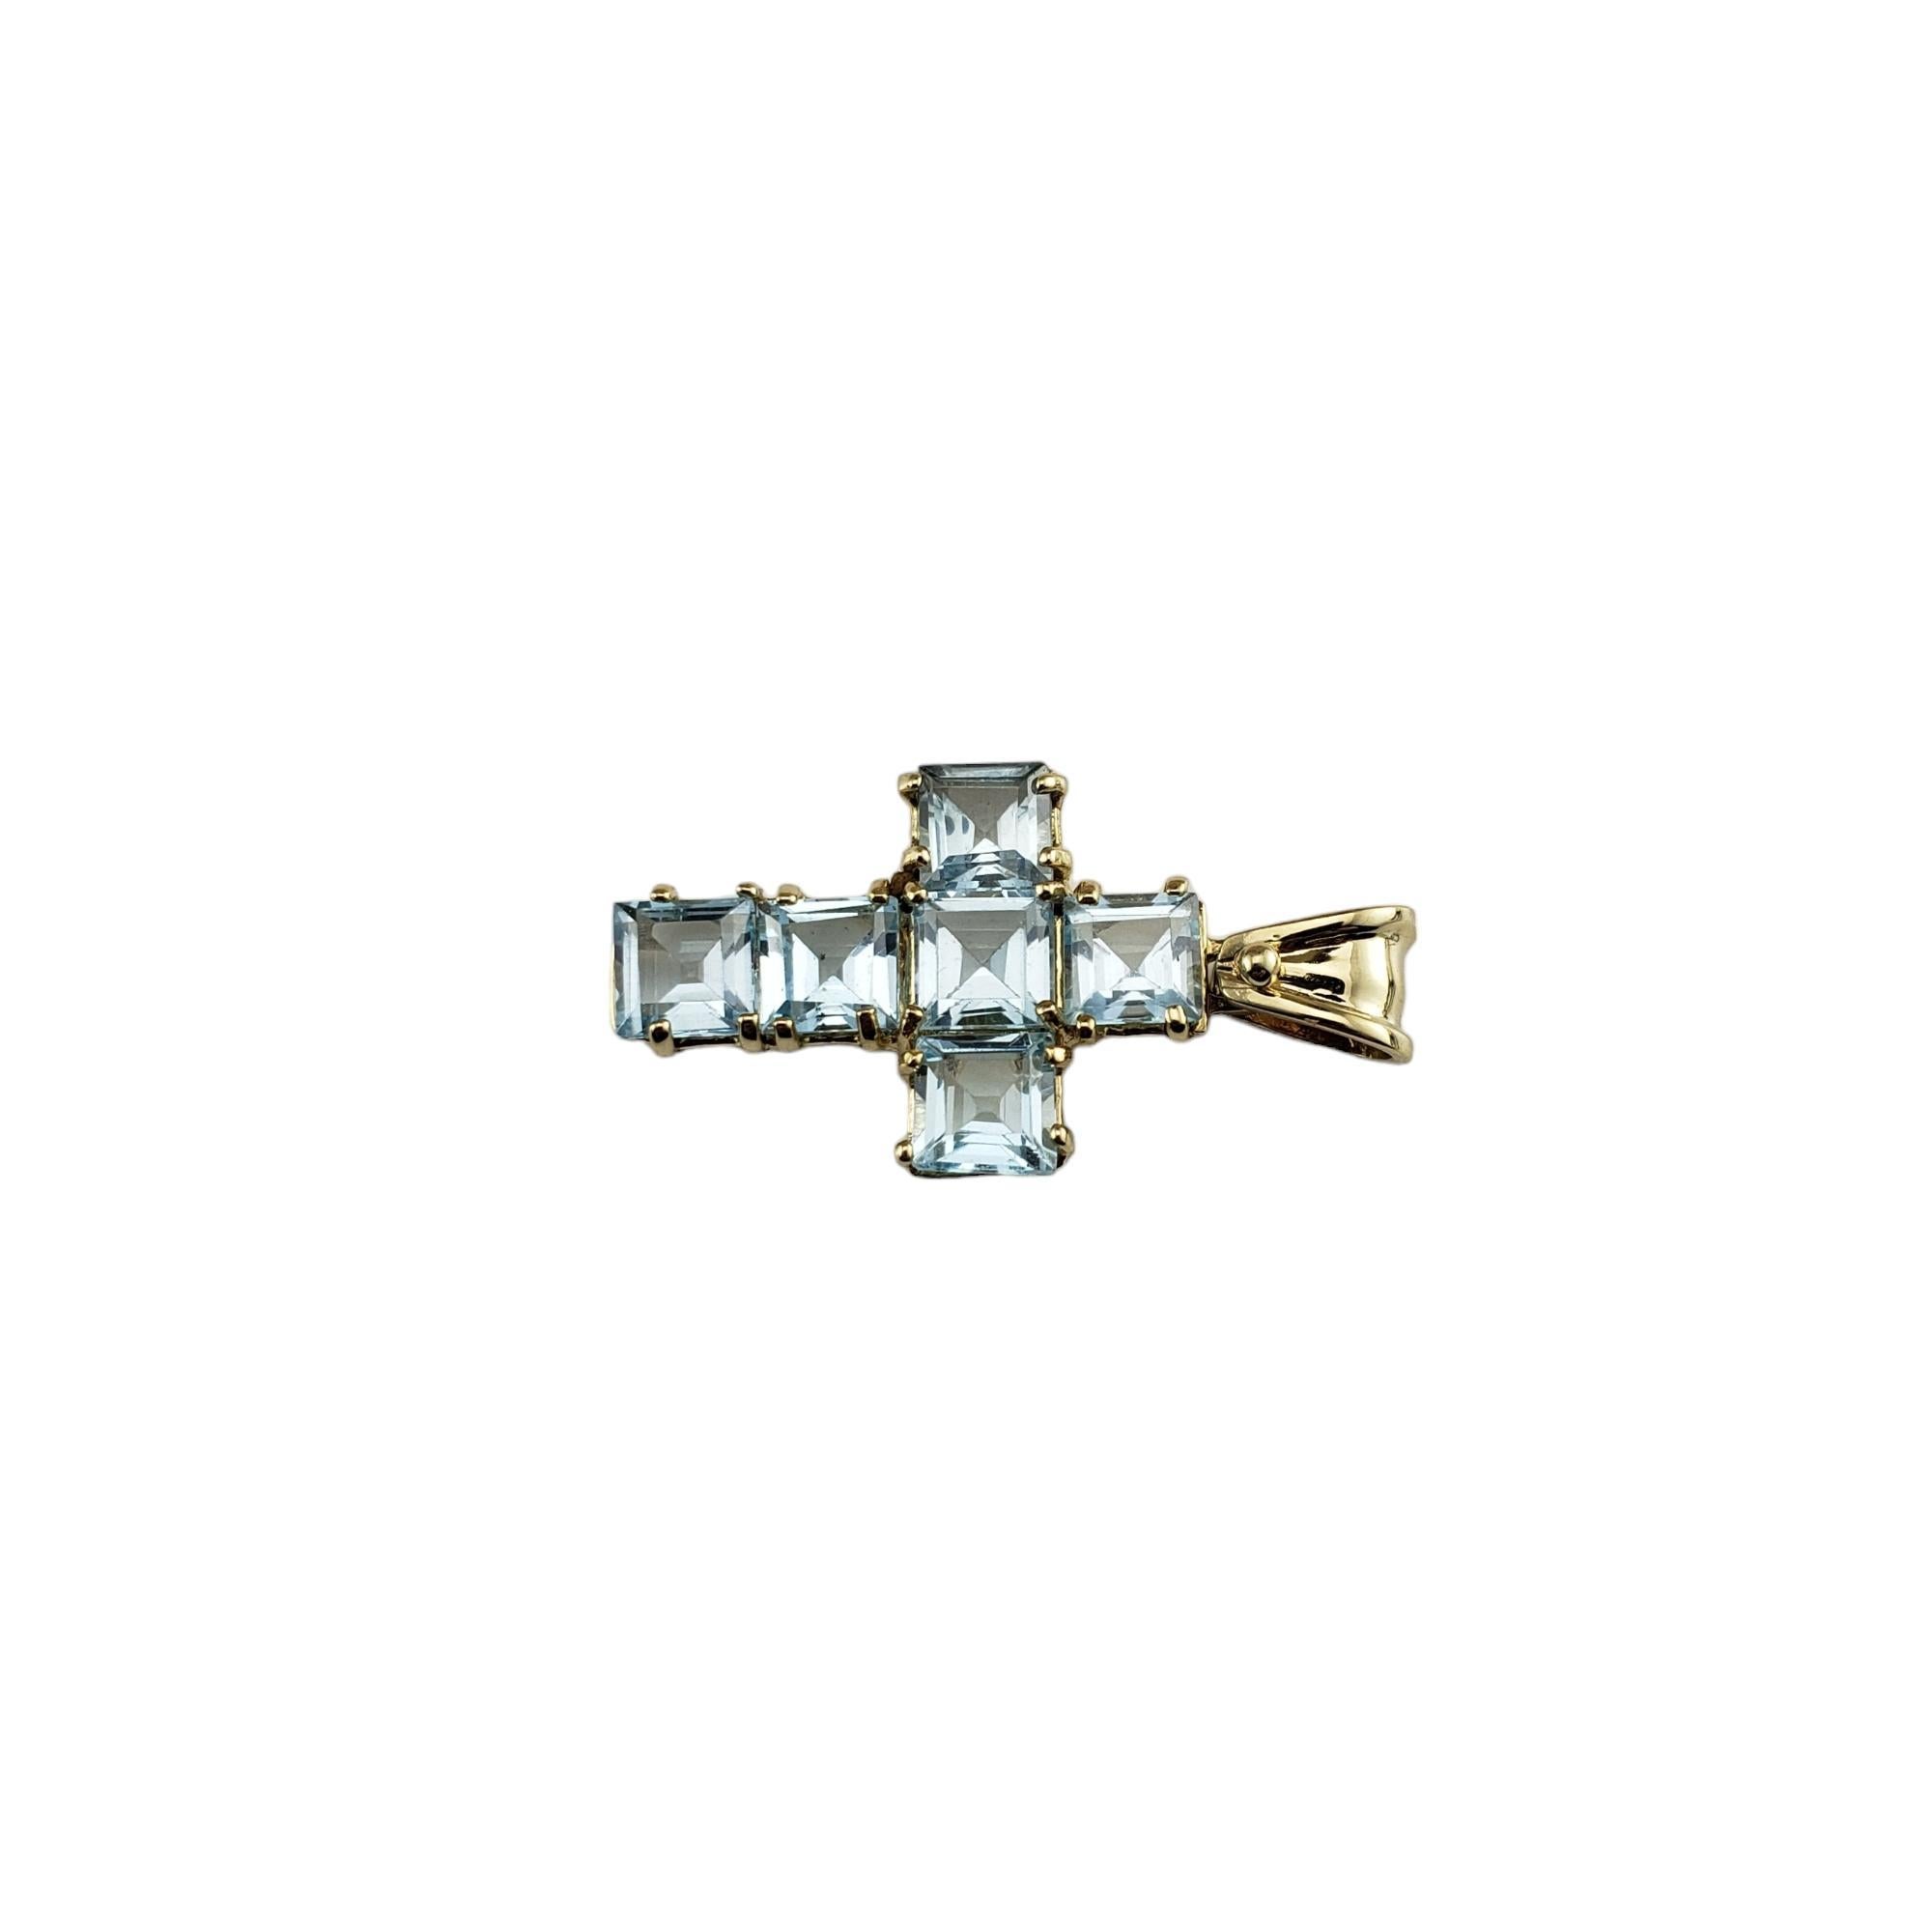 Vintage 14K Yellow Gold Aquamarine Cross Pendant -

This lovely cross pendant features six square cut aquamarine stones (5.0 mm x 5.0 mm) set in classic 14K yellow gold.  

Total aquamarine weight: 3.54 ct.

Size: 24 mm x 15 mm

Stamped: Italy